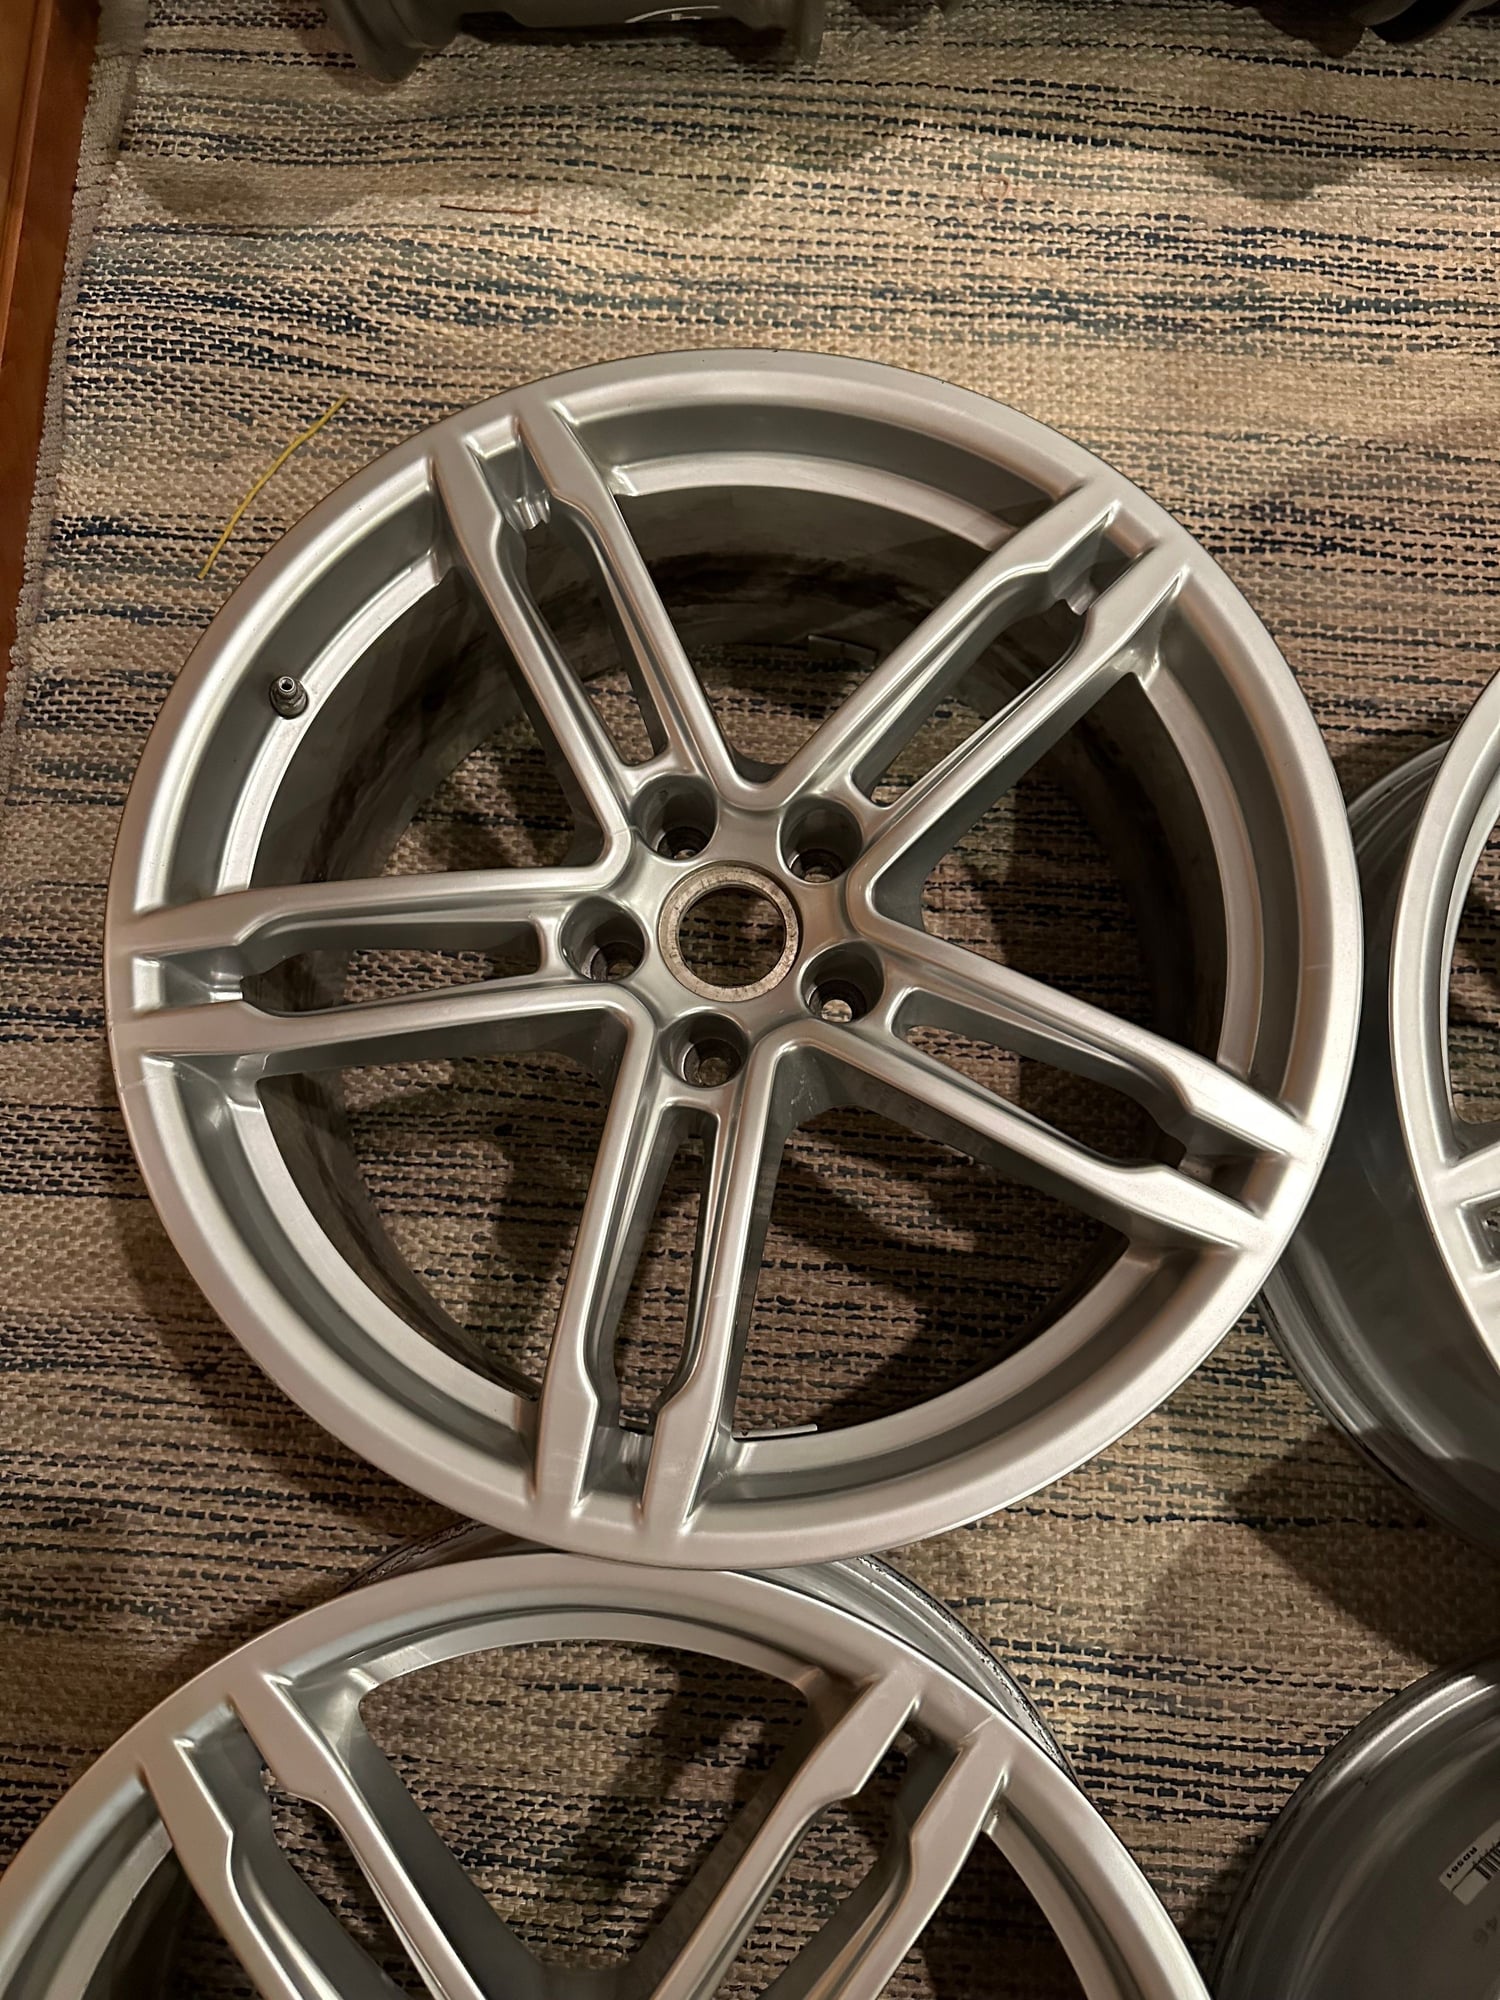 2020 Porsche Cayenne - 19" OEM Porsche Macan Turbo Wheels - Excellent - Macan Turbo S GTS 95B - Wheels and Tires/Axles - $950 - Plymouth, MN 55447, United States